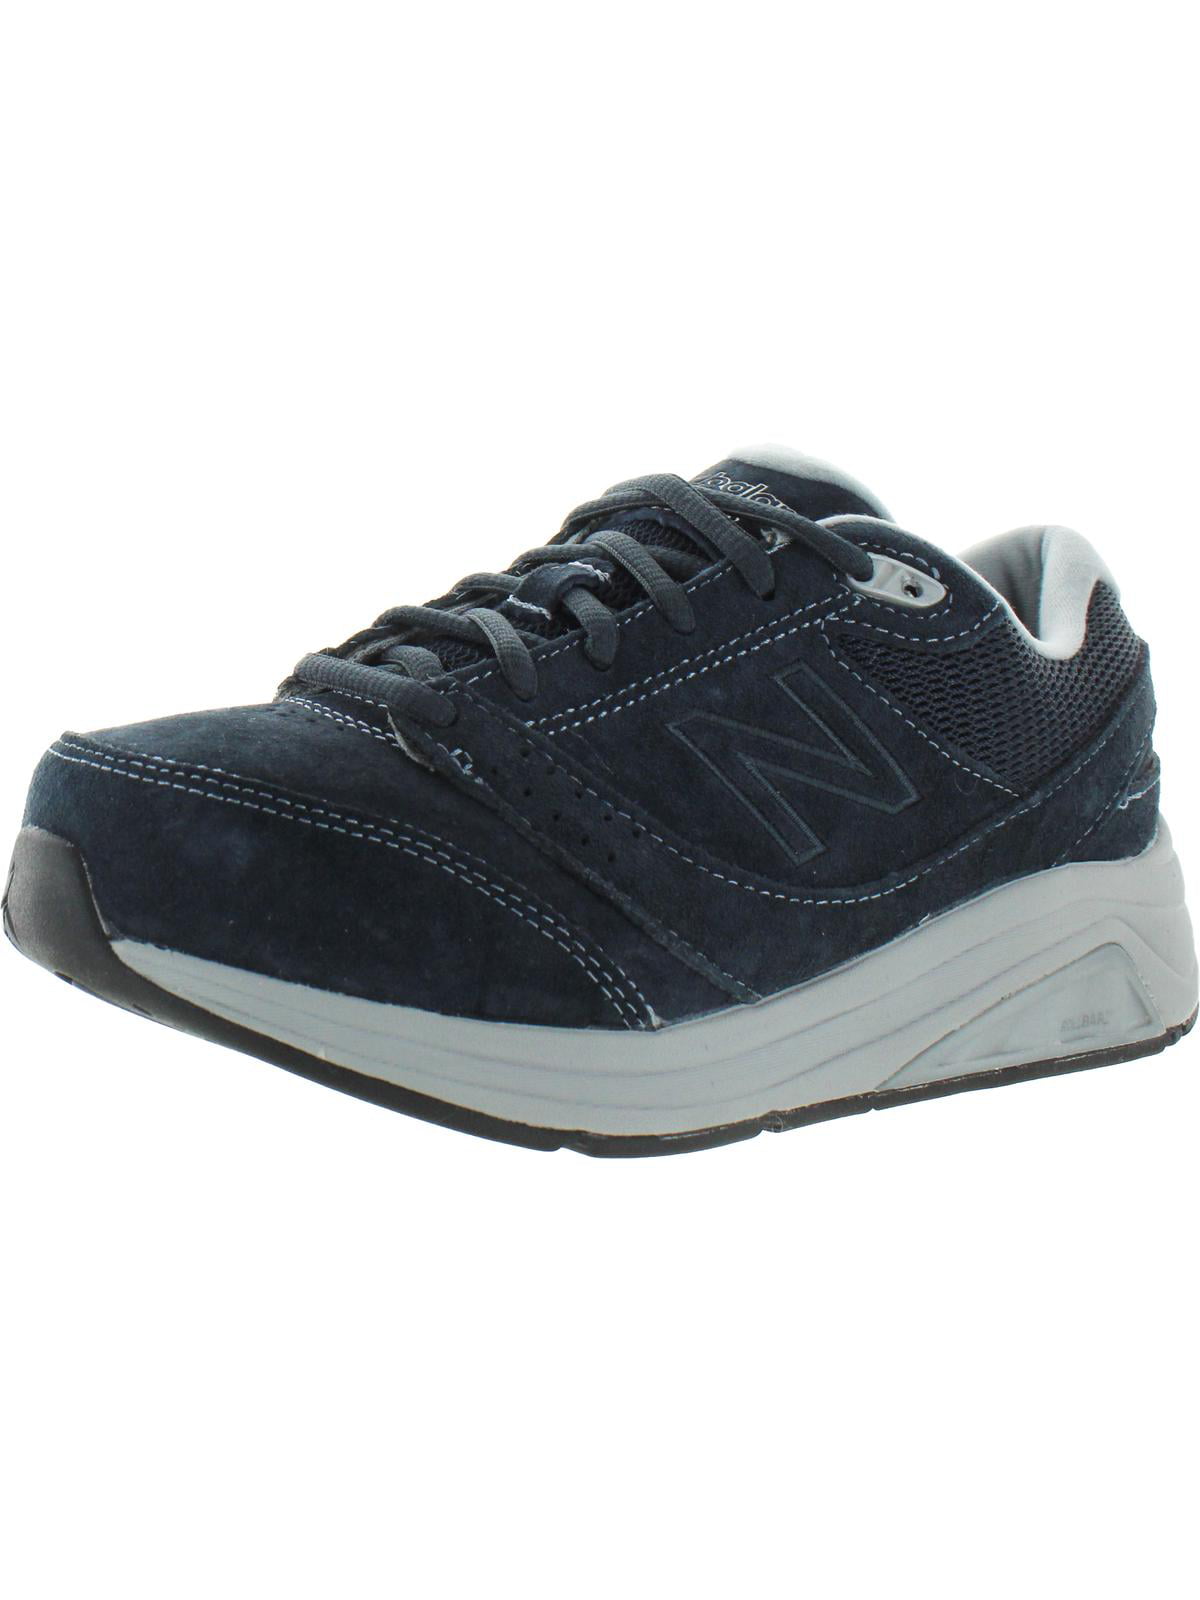 new balance womens shoes extra wide